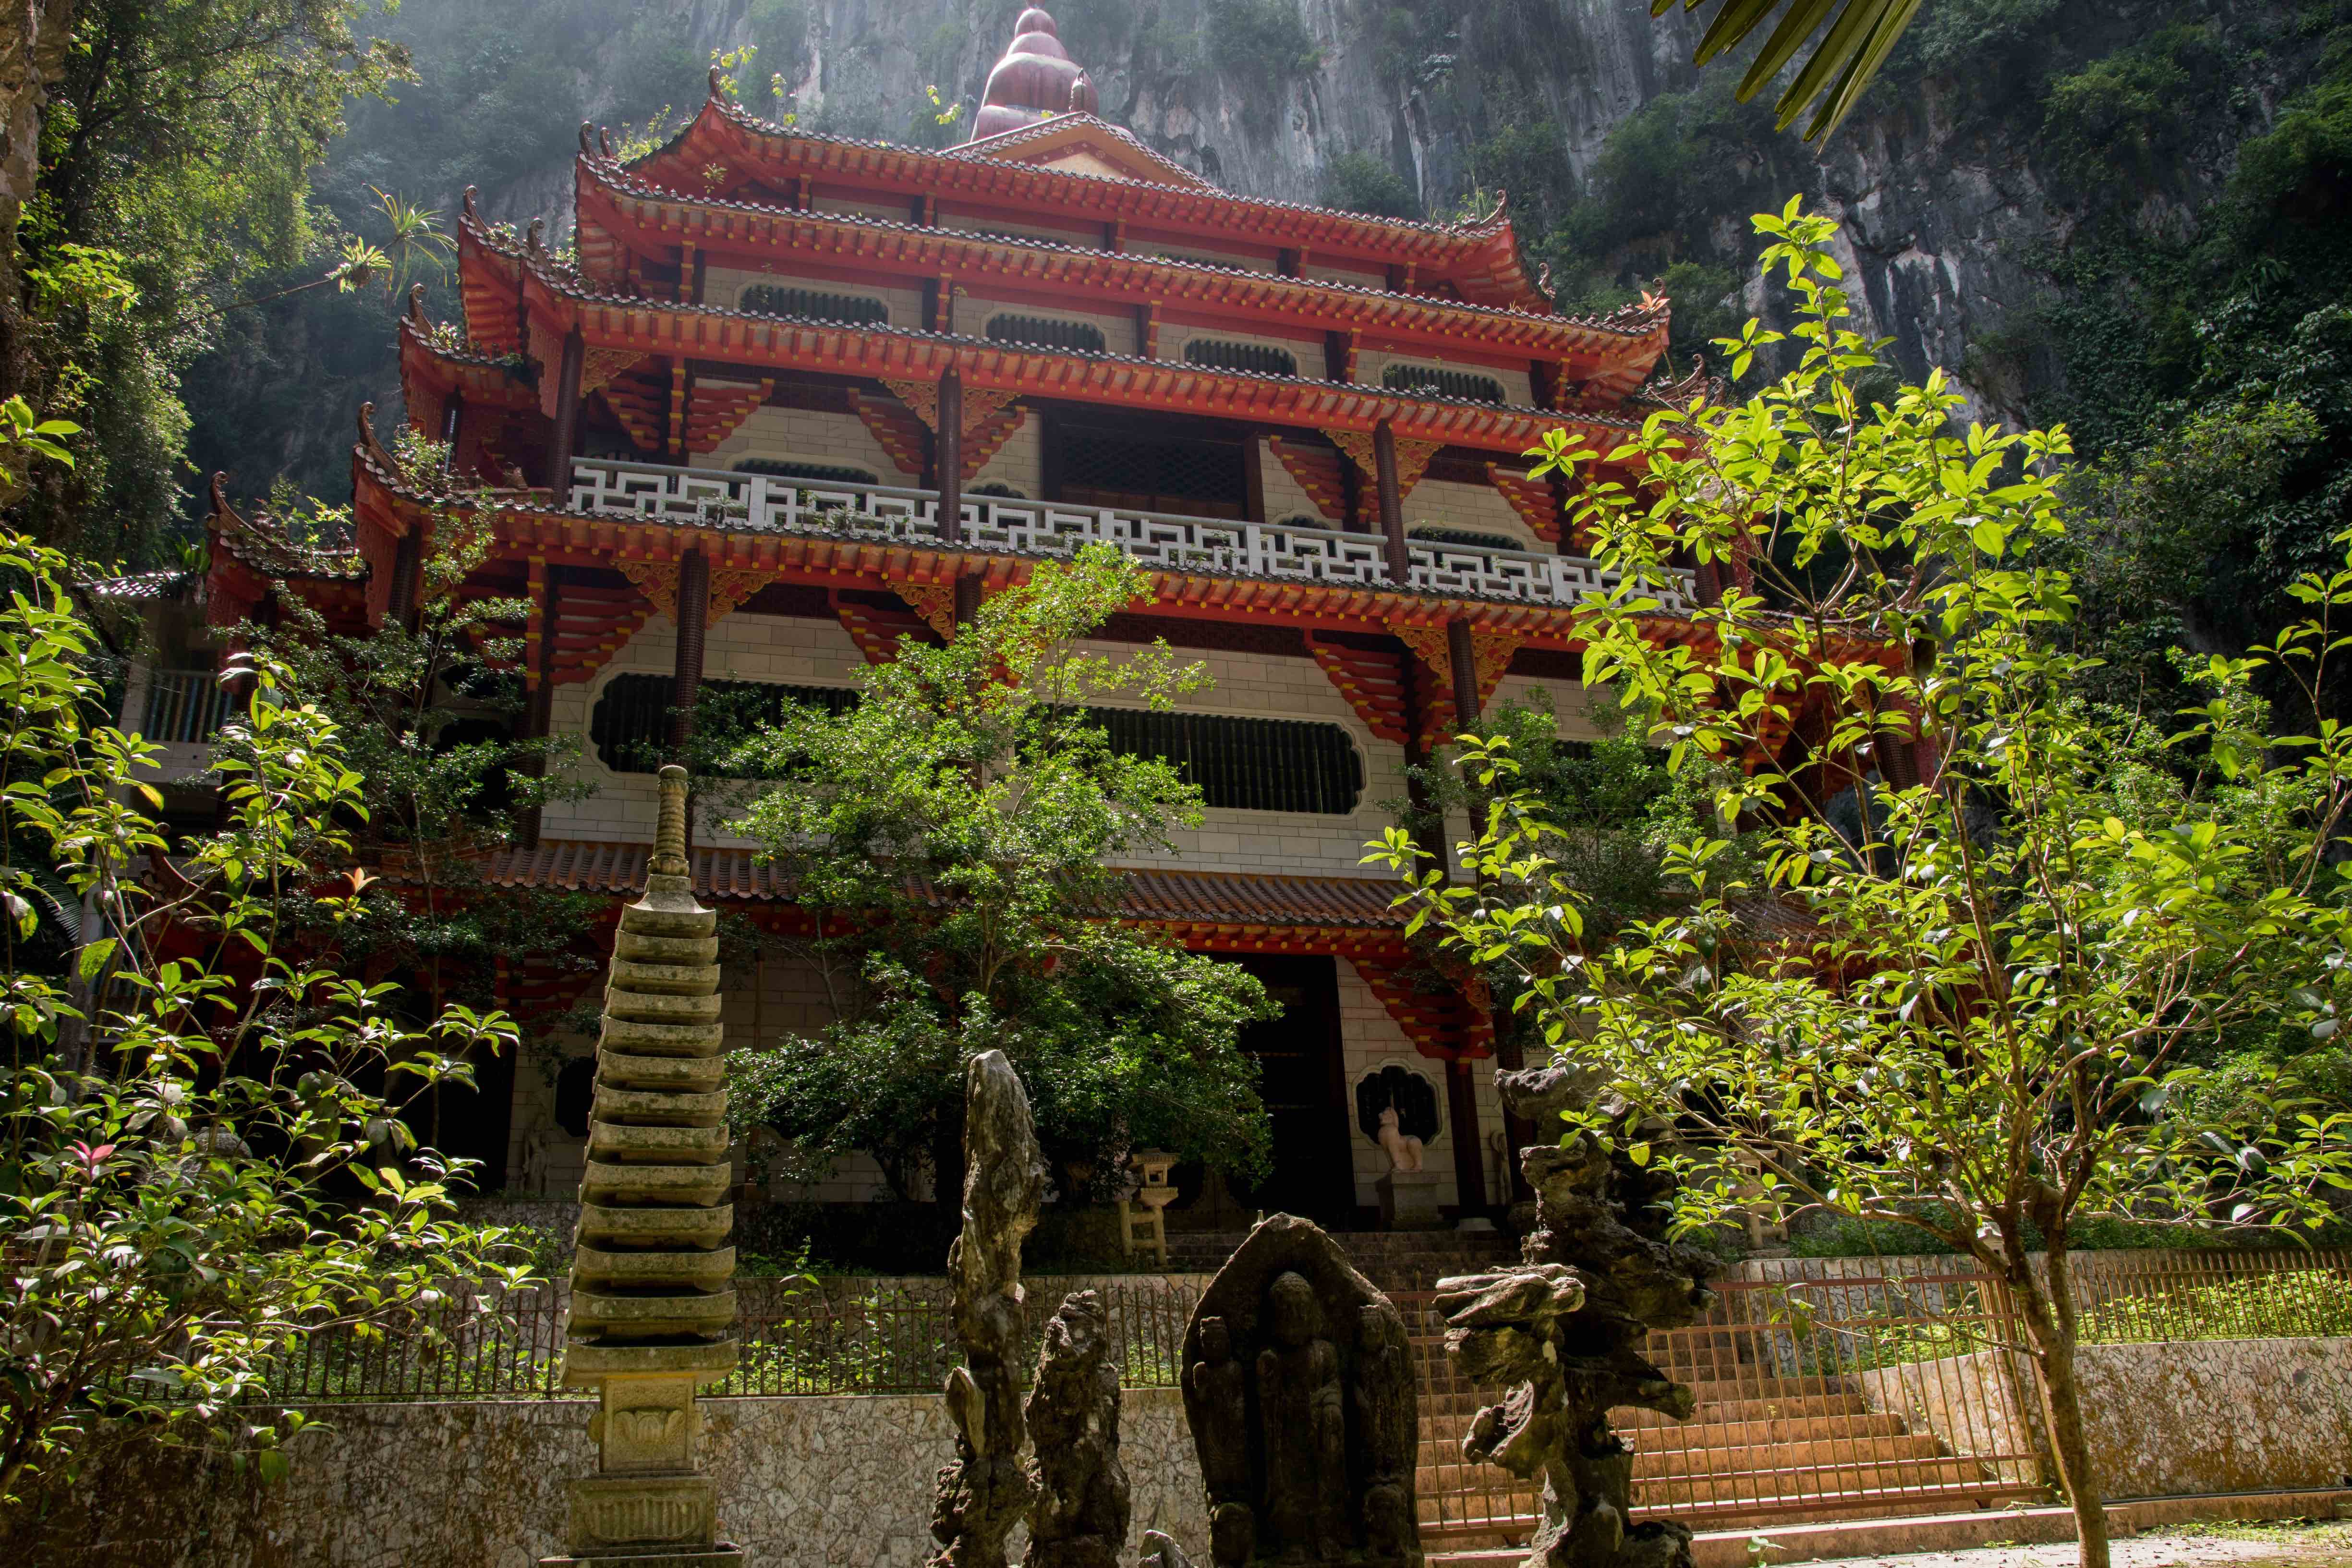 Sam Poh Tong temple near Ipoh, in the center of Malaysia